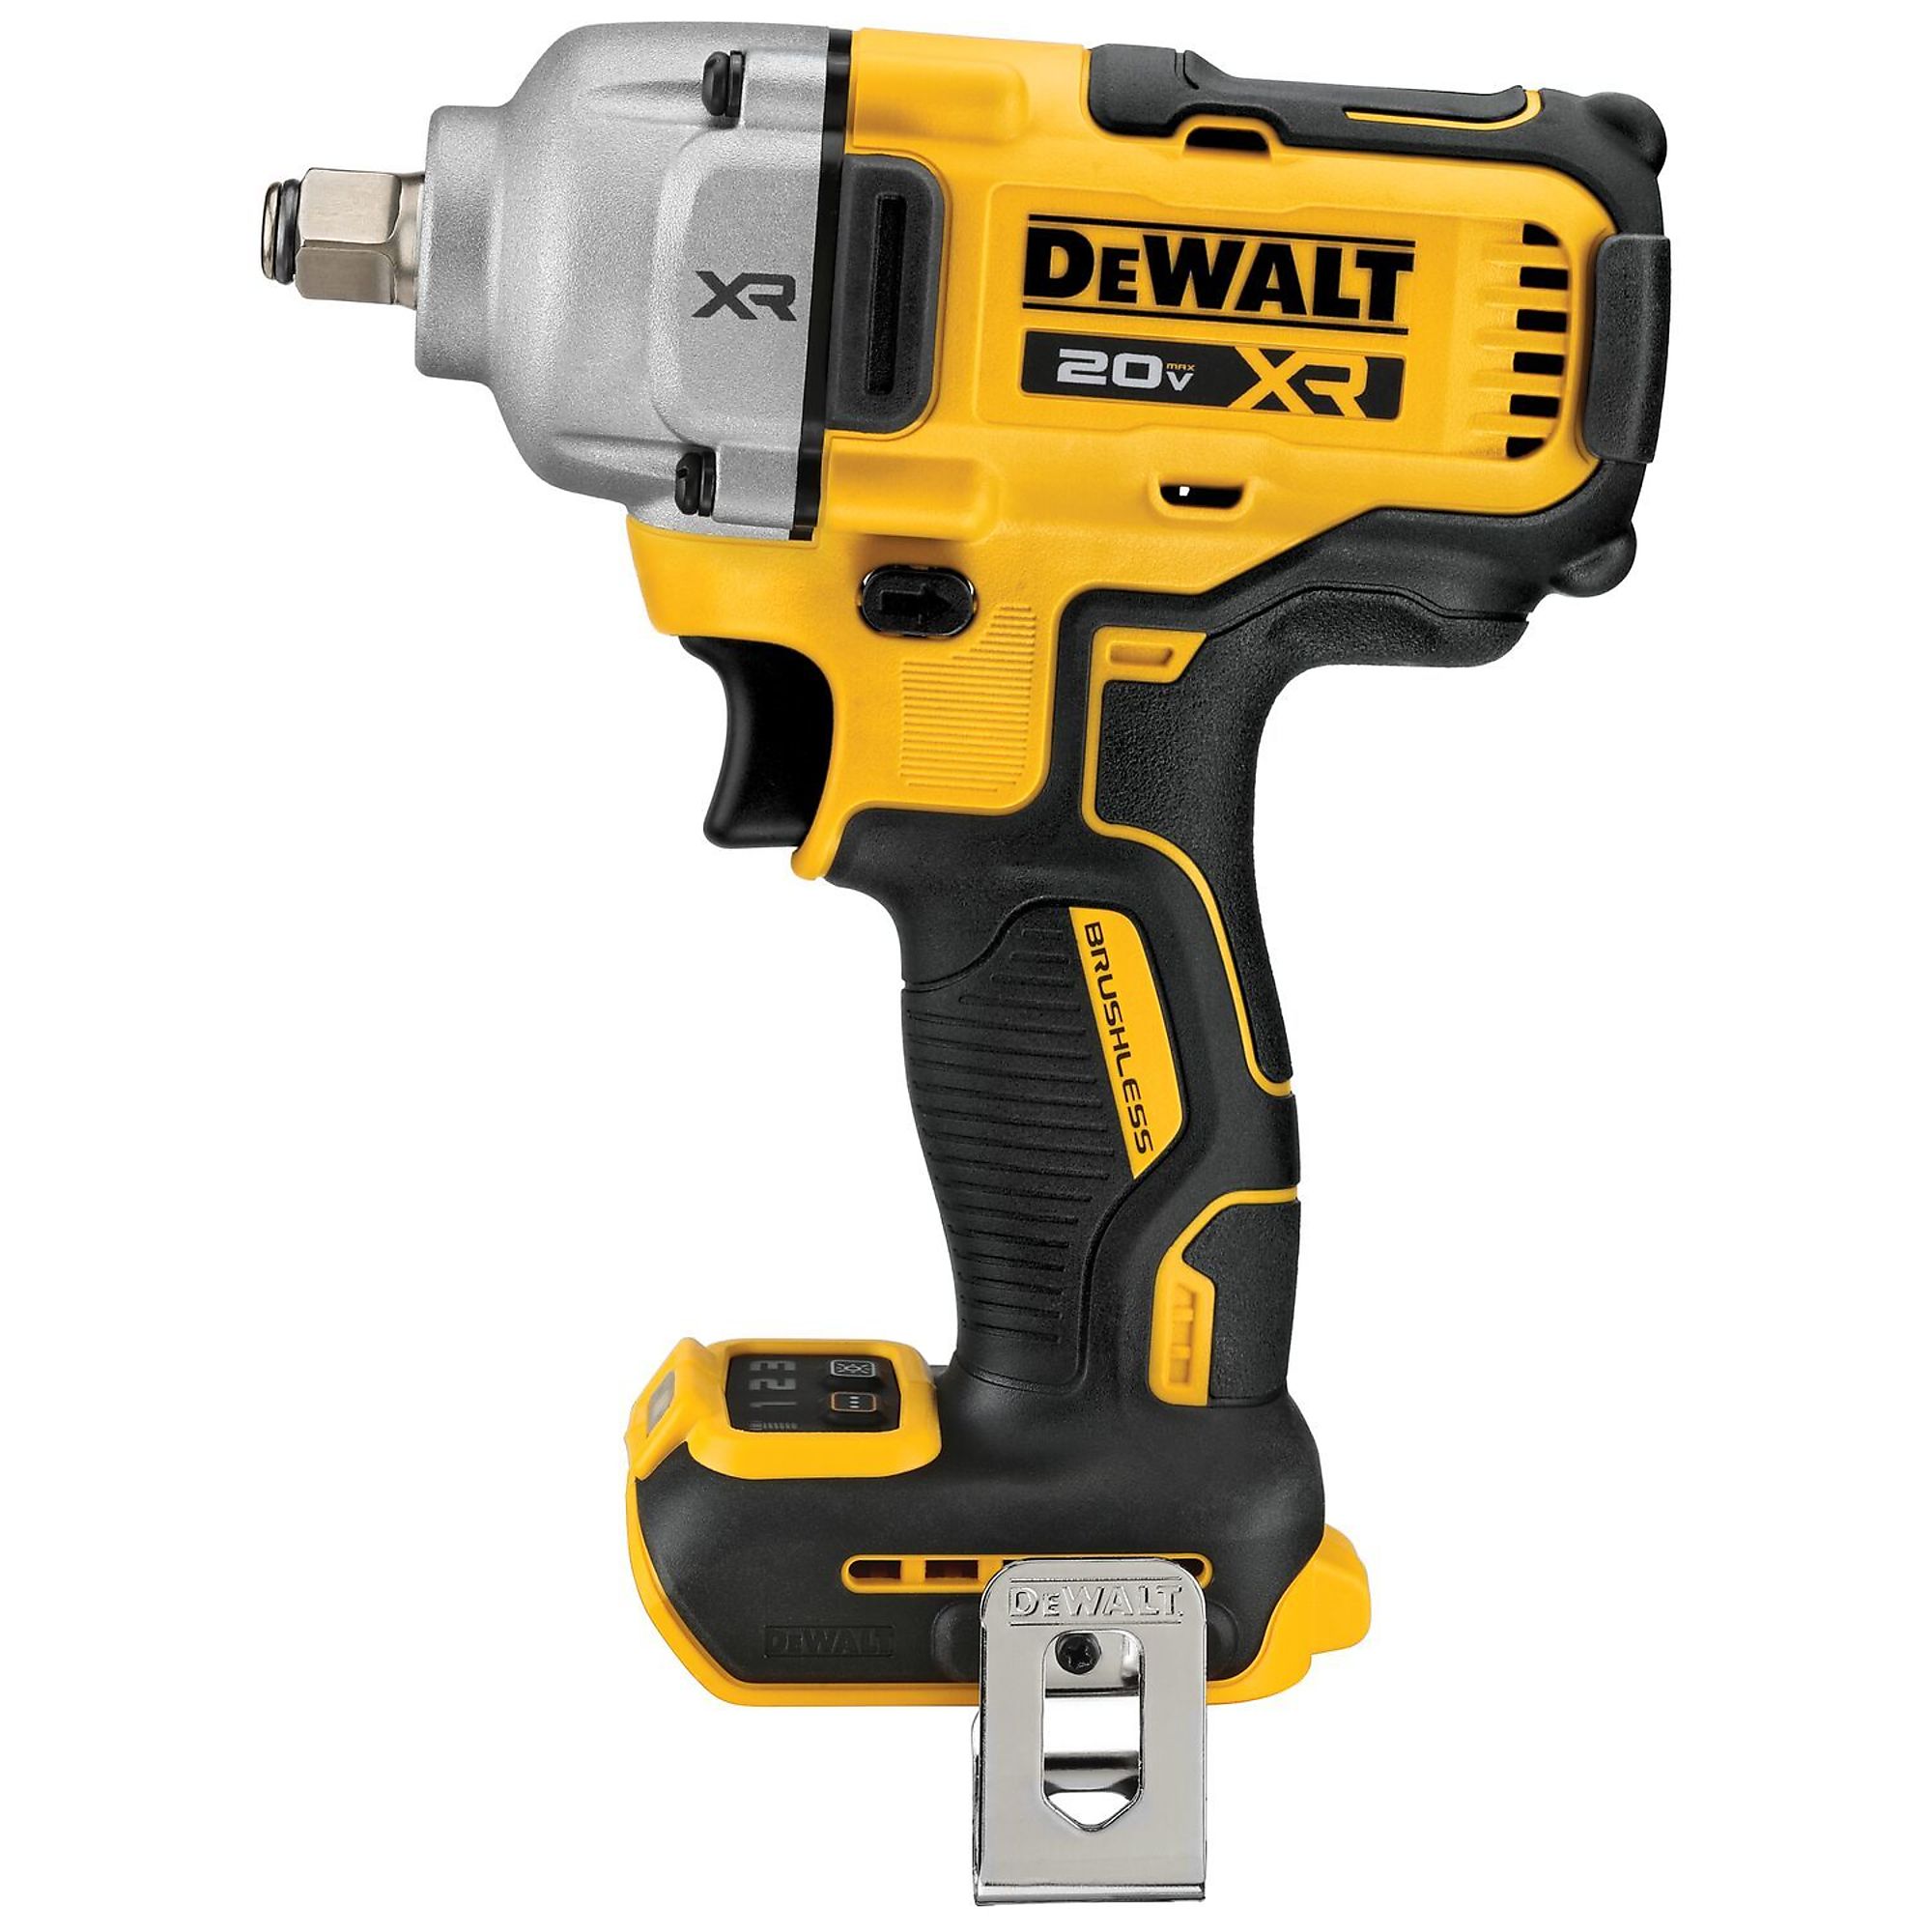 DEWALT, 20V MAX 1/2Inch Mid-Range Impact Wrench (Tool Only), Drive Size 1/2 in, Volts 20, Battery Type Lithium-ion, Model DCF891B